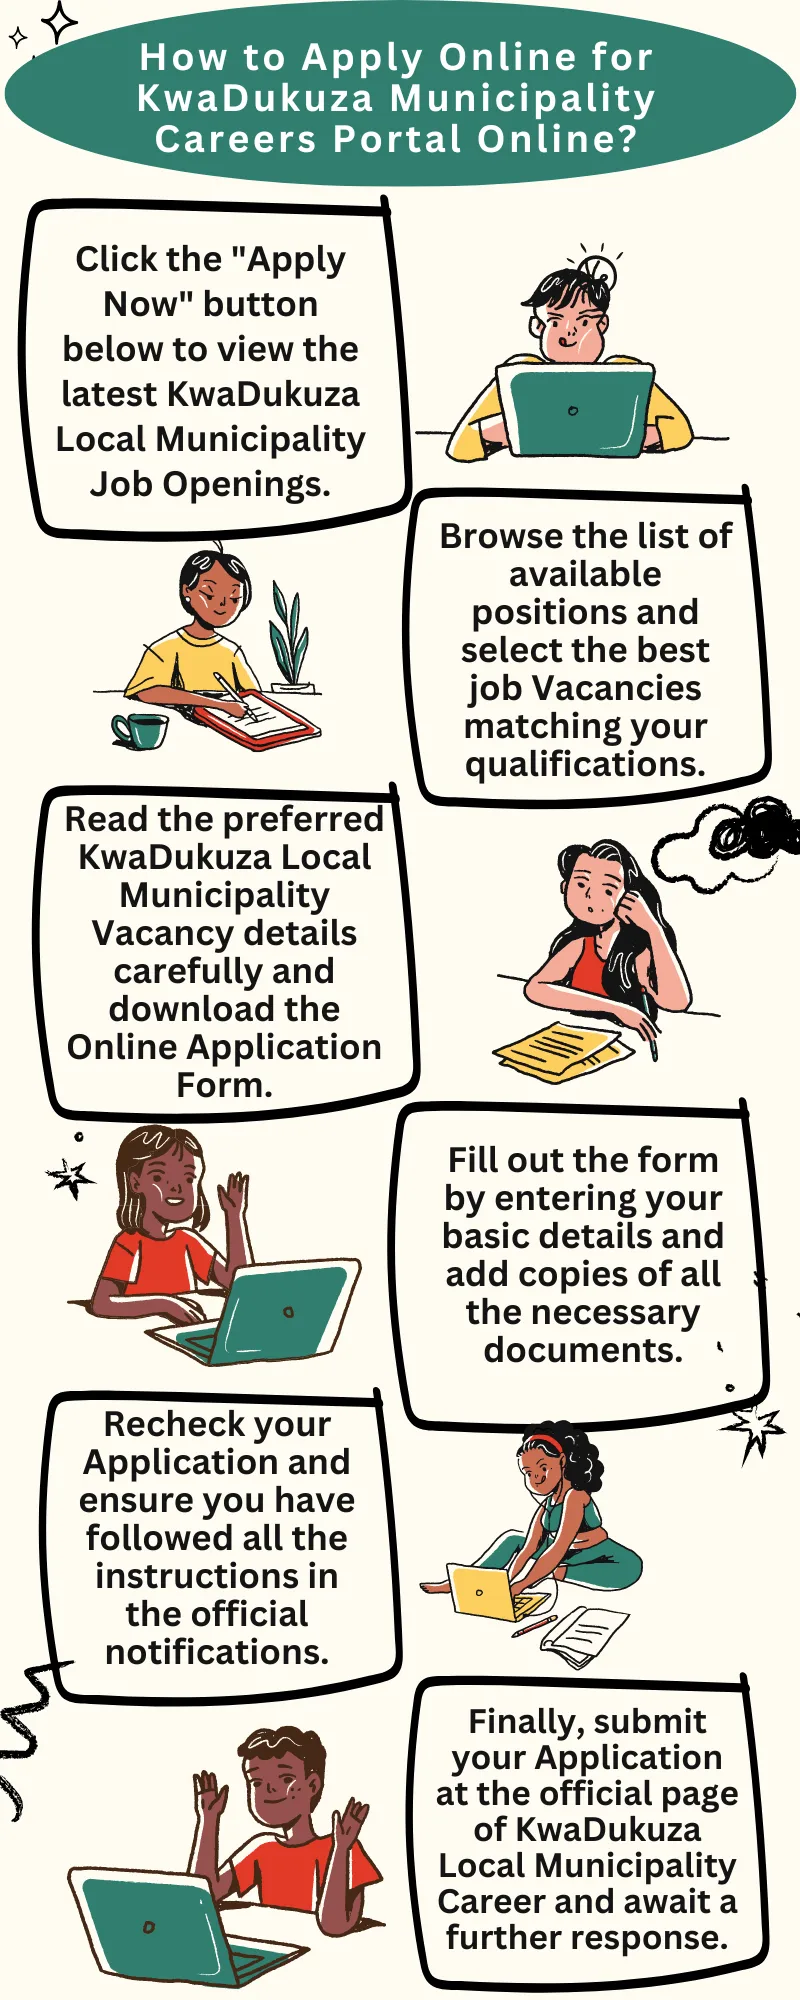 How to Apply Online for KwaDukuza Municipality Careers Portal Online?